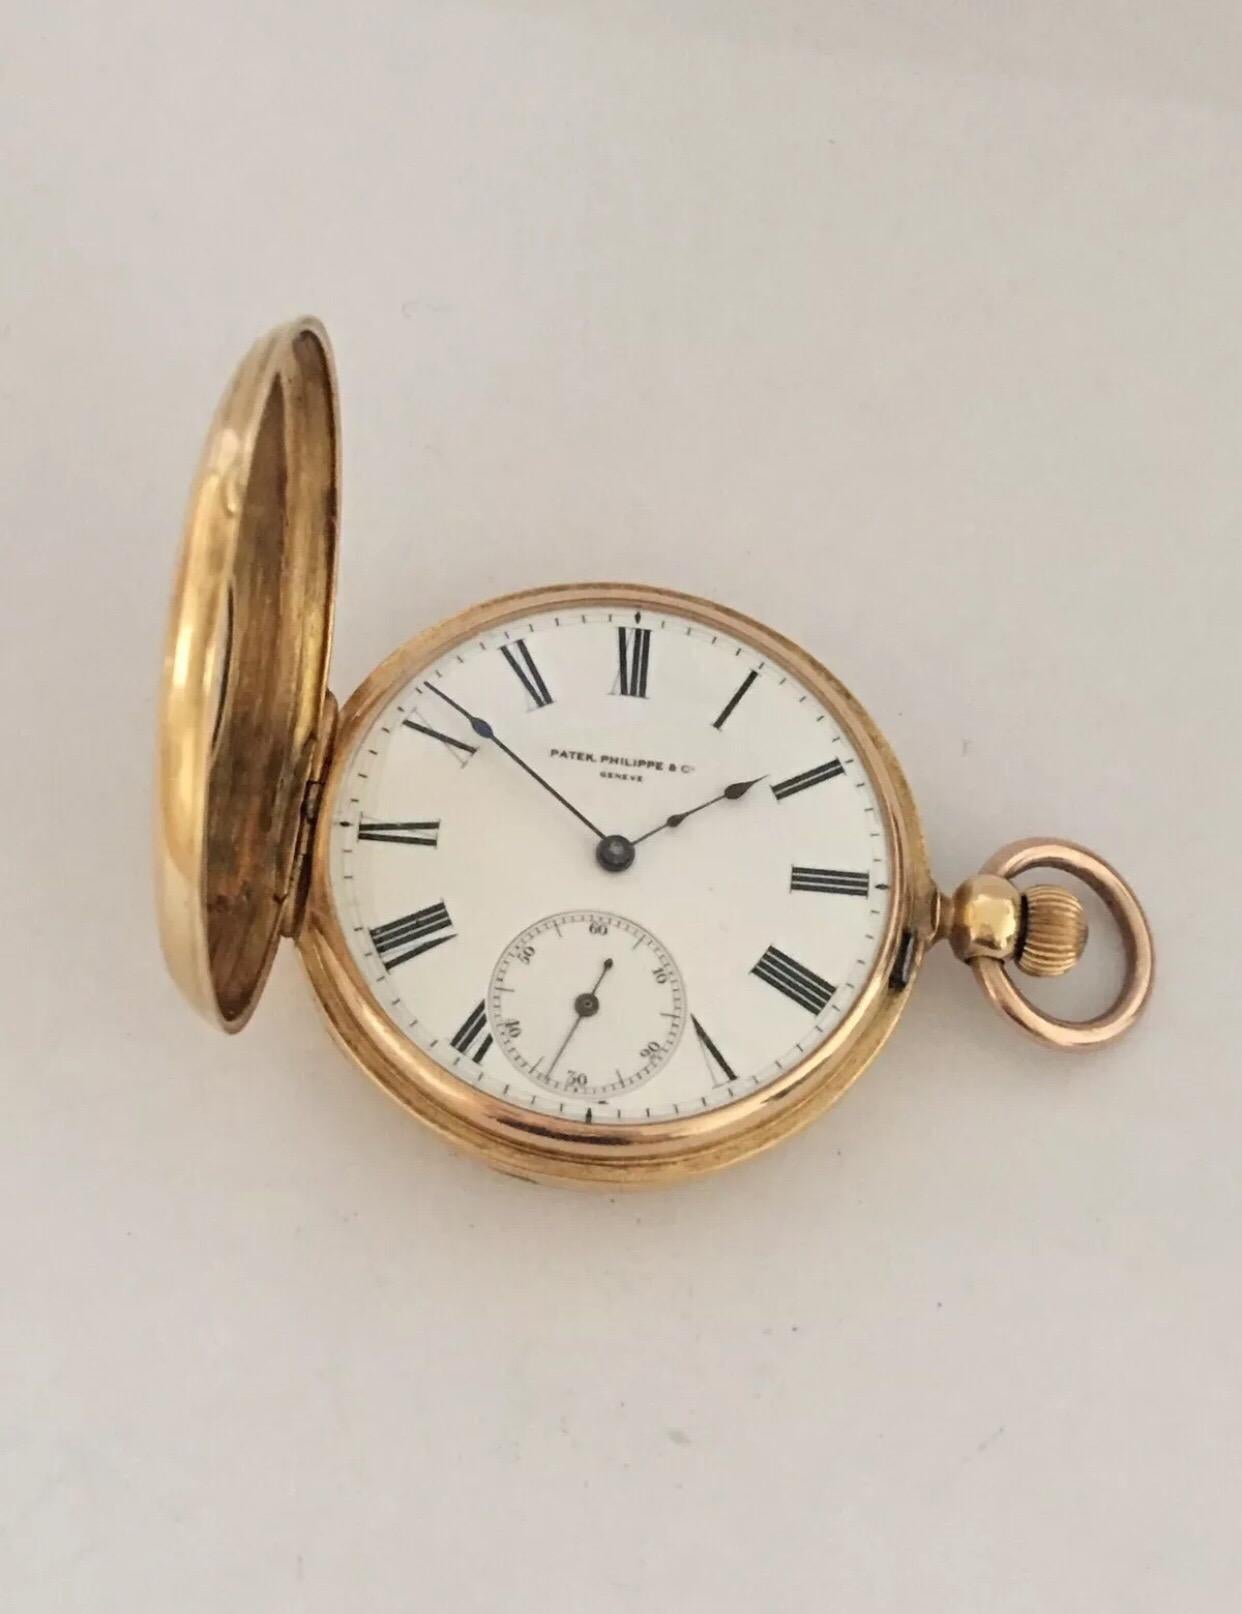 18K Gold Patek, Philippe & Co. Geneve Half Hunter Pocket Watch.


This 45mm diameter antique pocket watch is working and ticking well. The case shows signs of some wear and tear. The winder is a bit loose but it still wind. This watch weighed 71.5